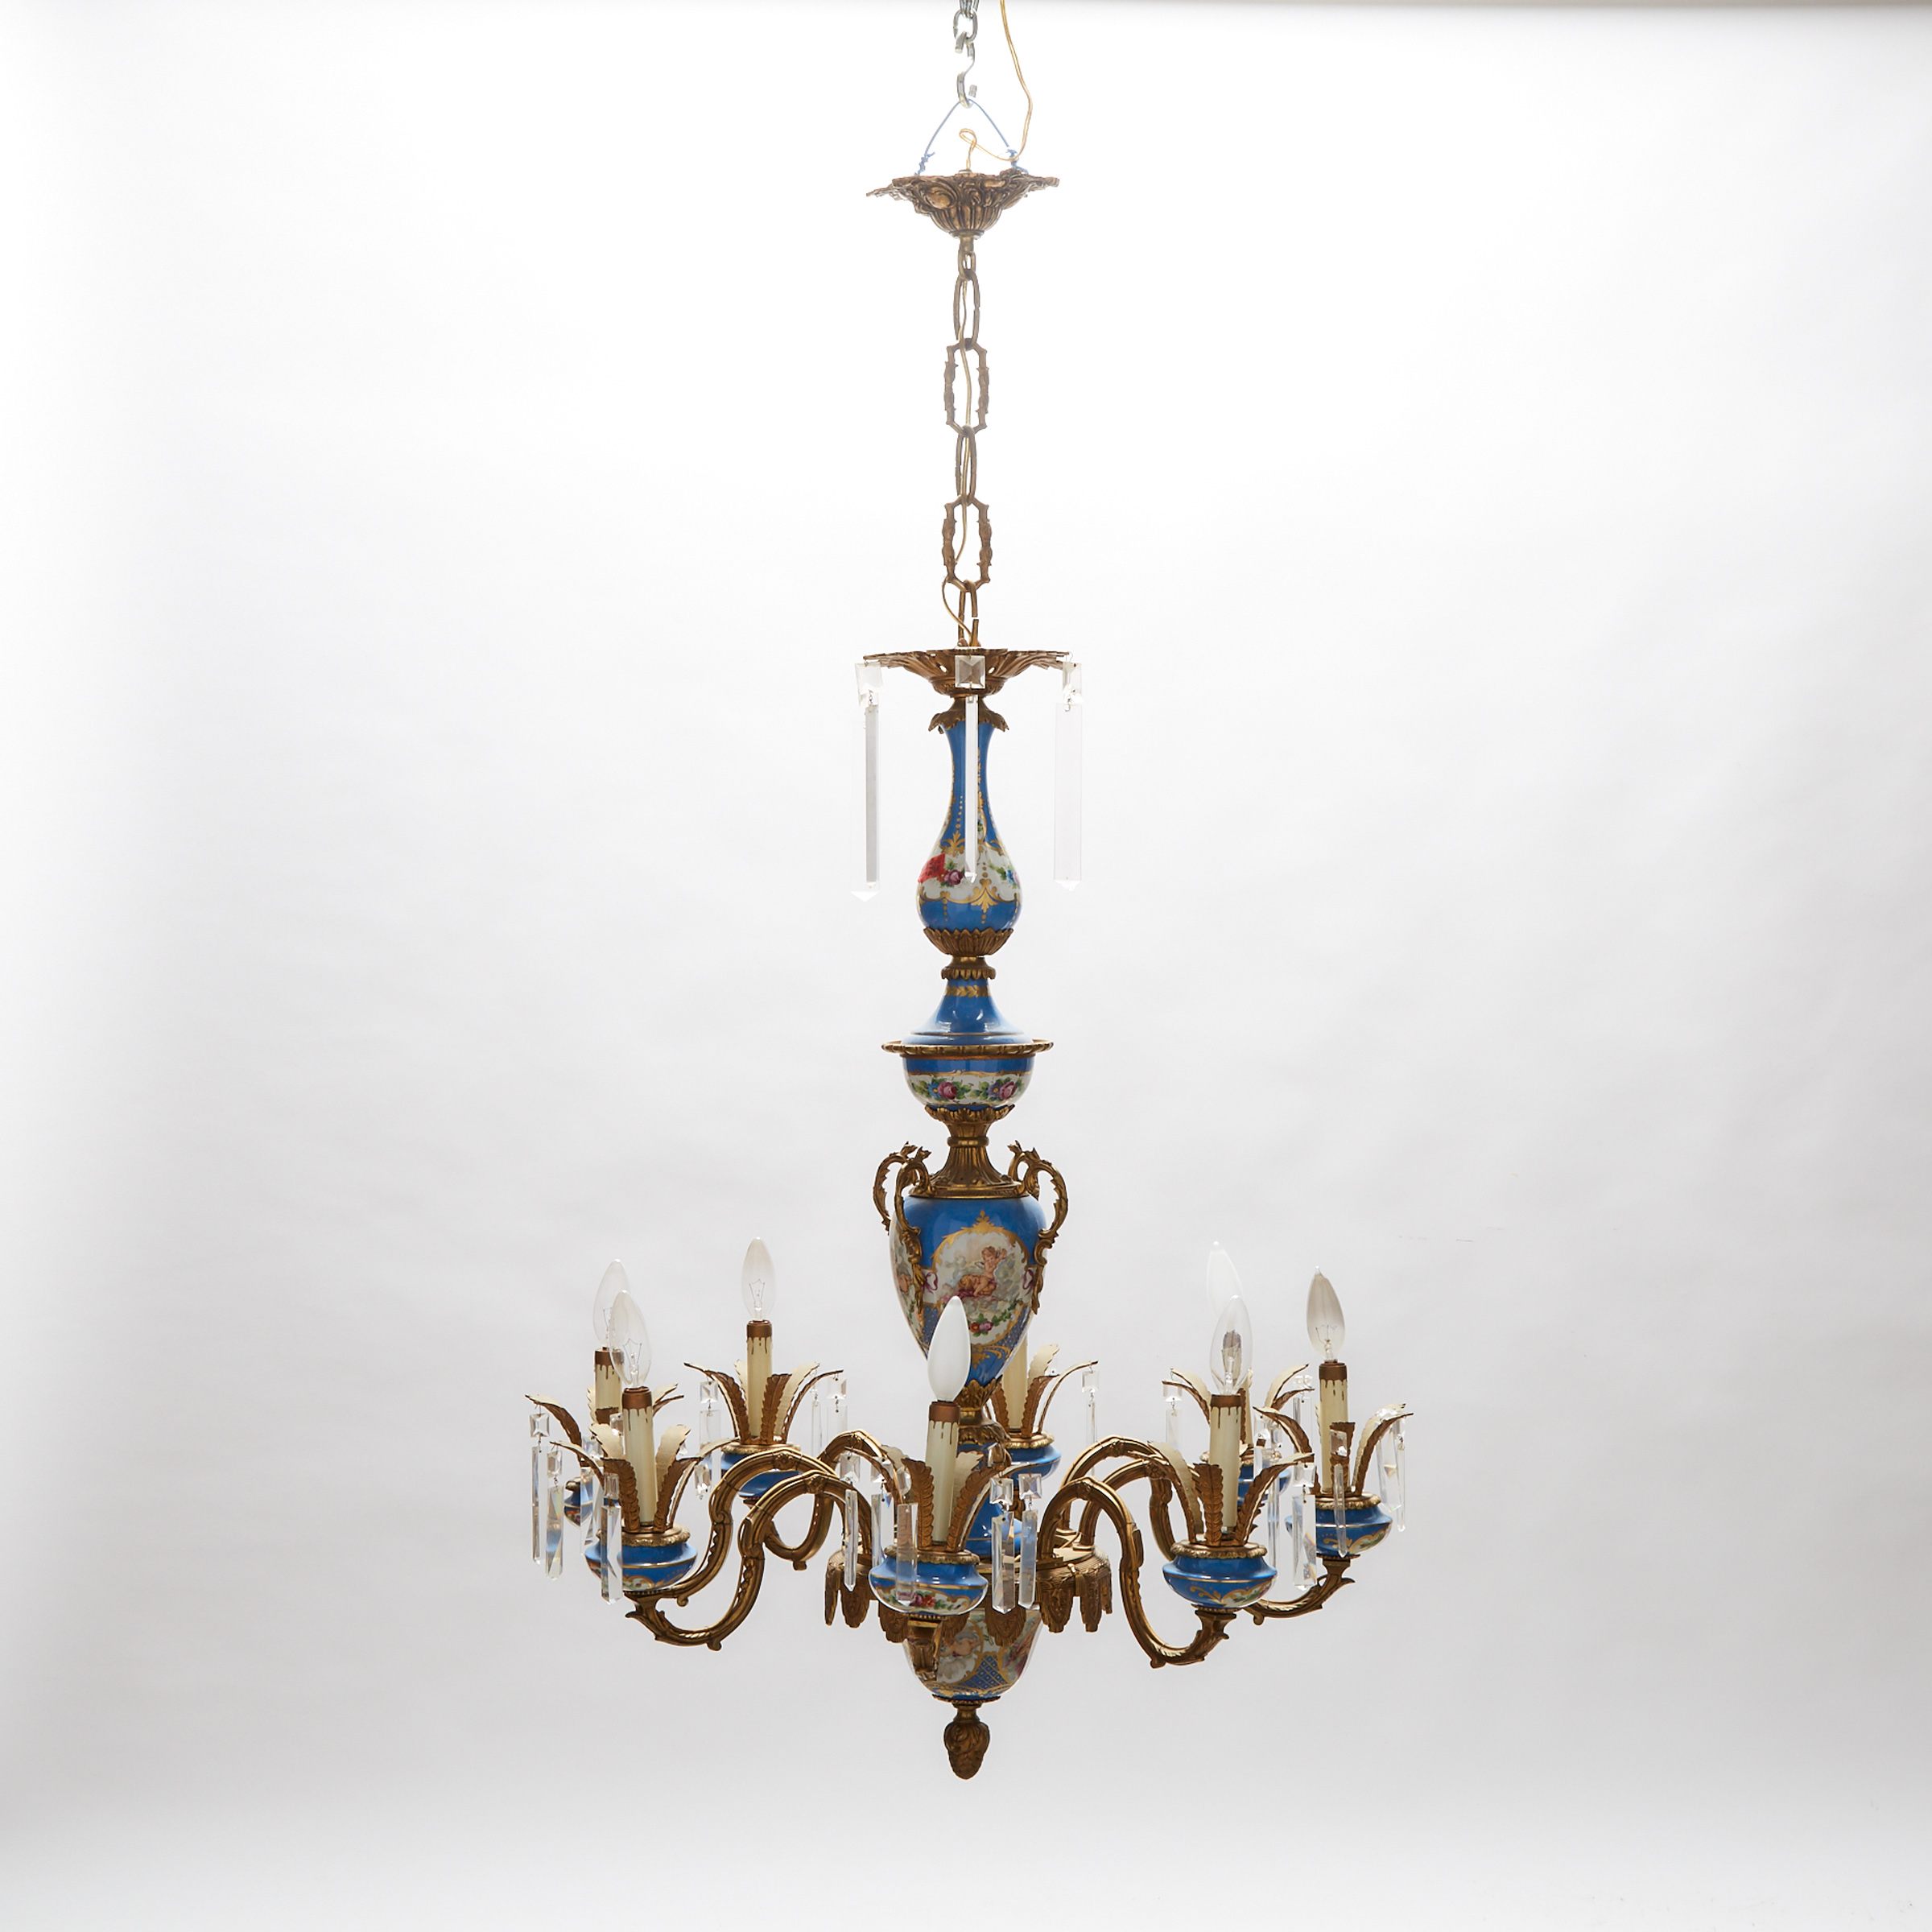 French Sevres Style Porcelain Mounted Ormolu Eight-Light Chandelier, early 20th century